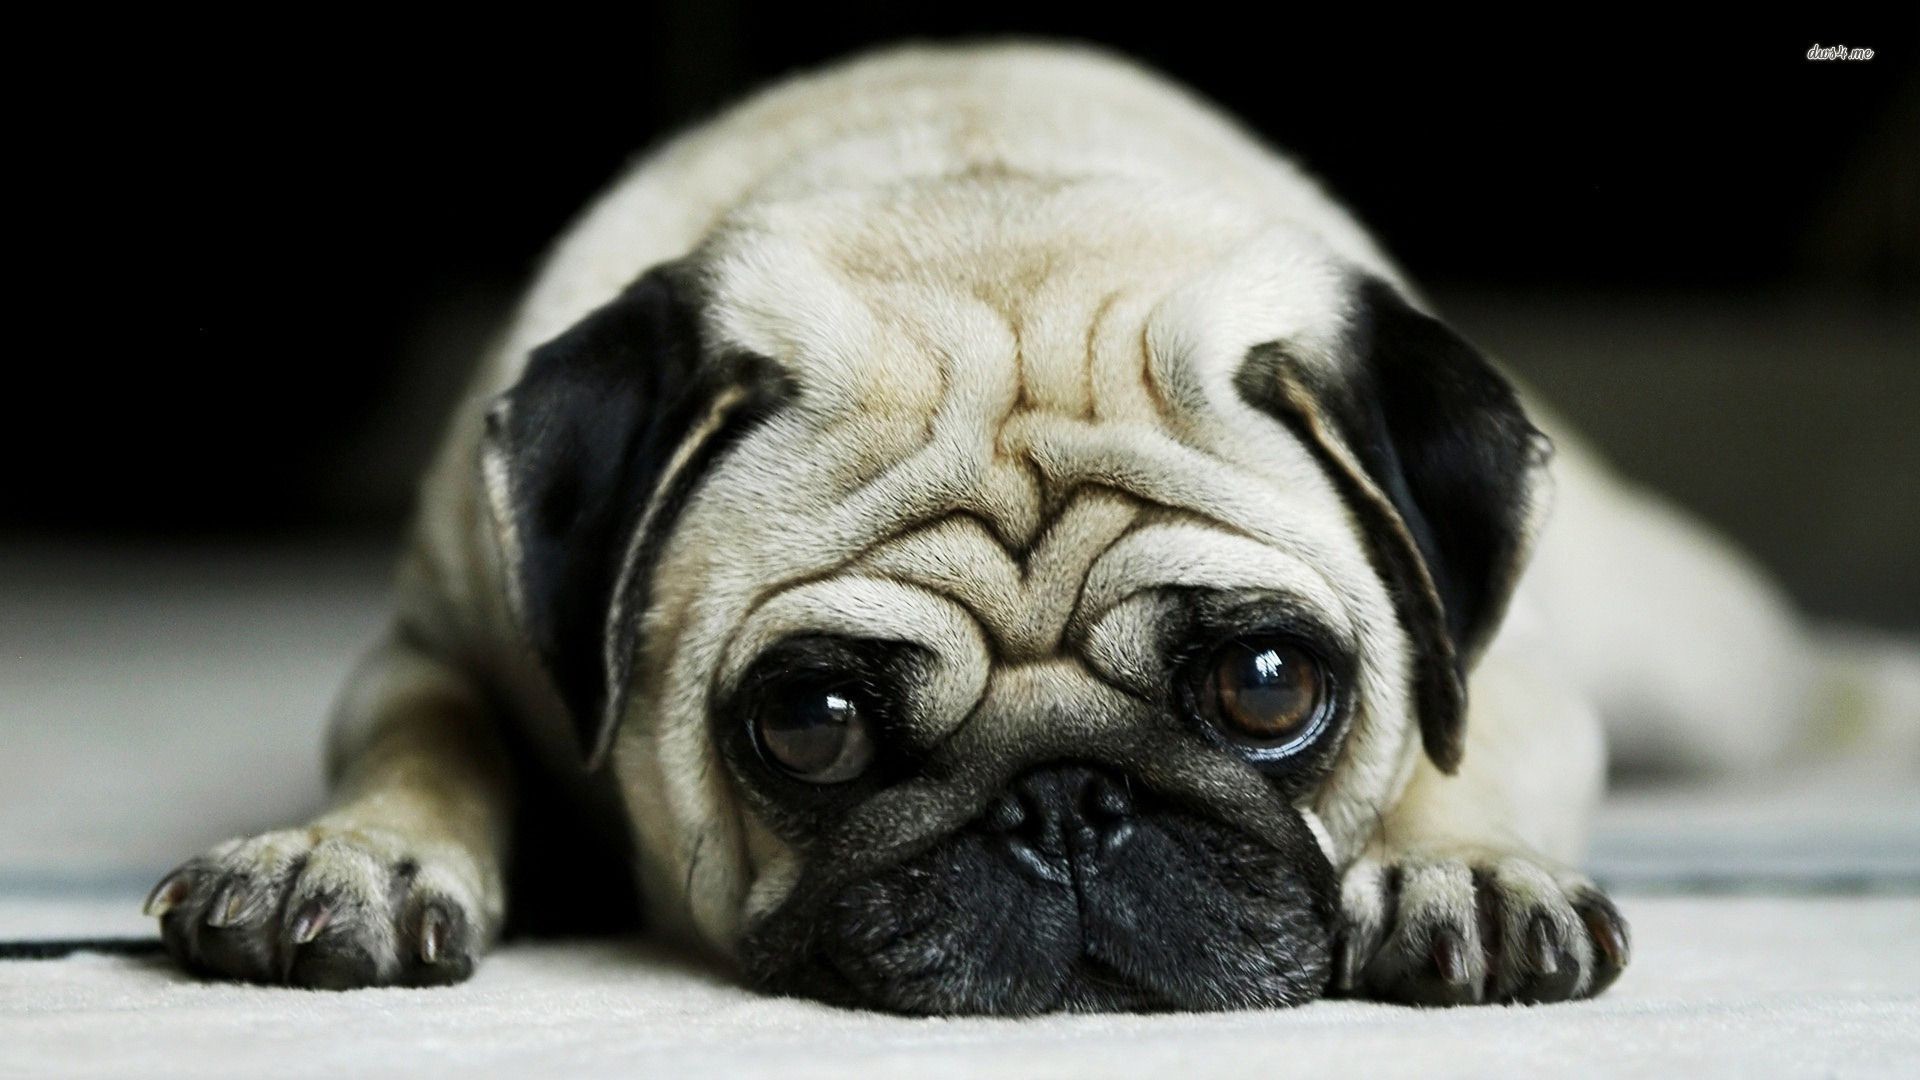 1920x1080 Pug Dog Wallpapers Android Apps on Google Play 1920Ã1080 Pug Dog Wallpapers  (39